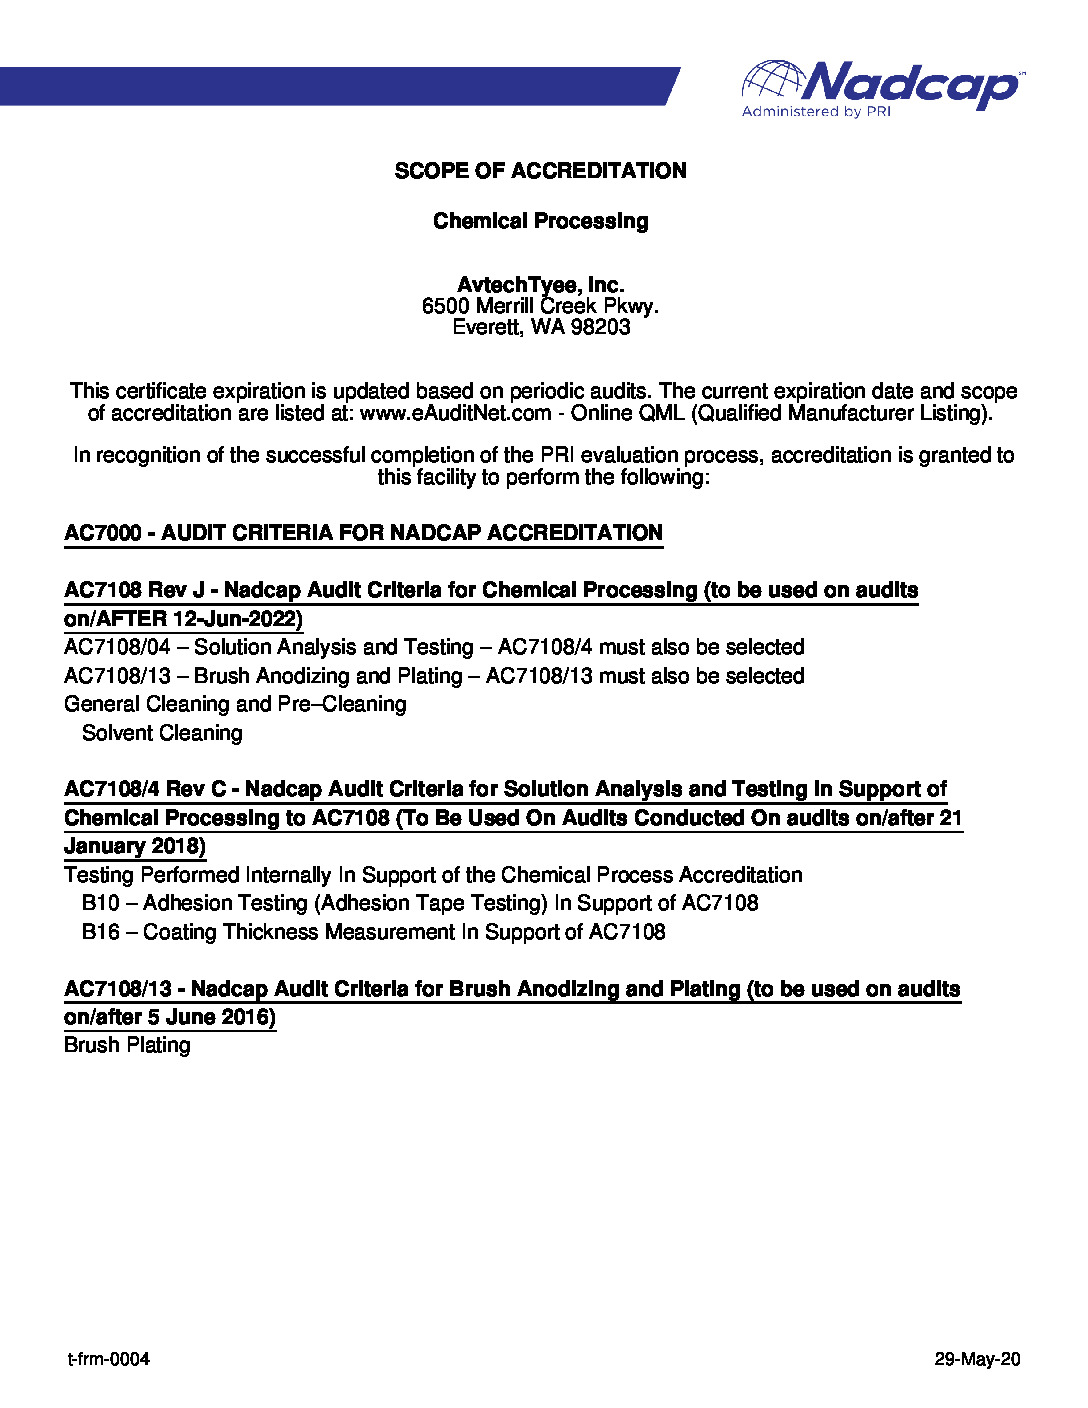 Scope of Chemical Processing Accreditation